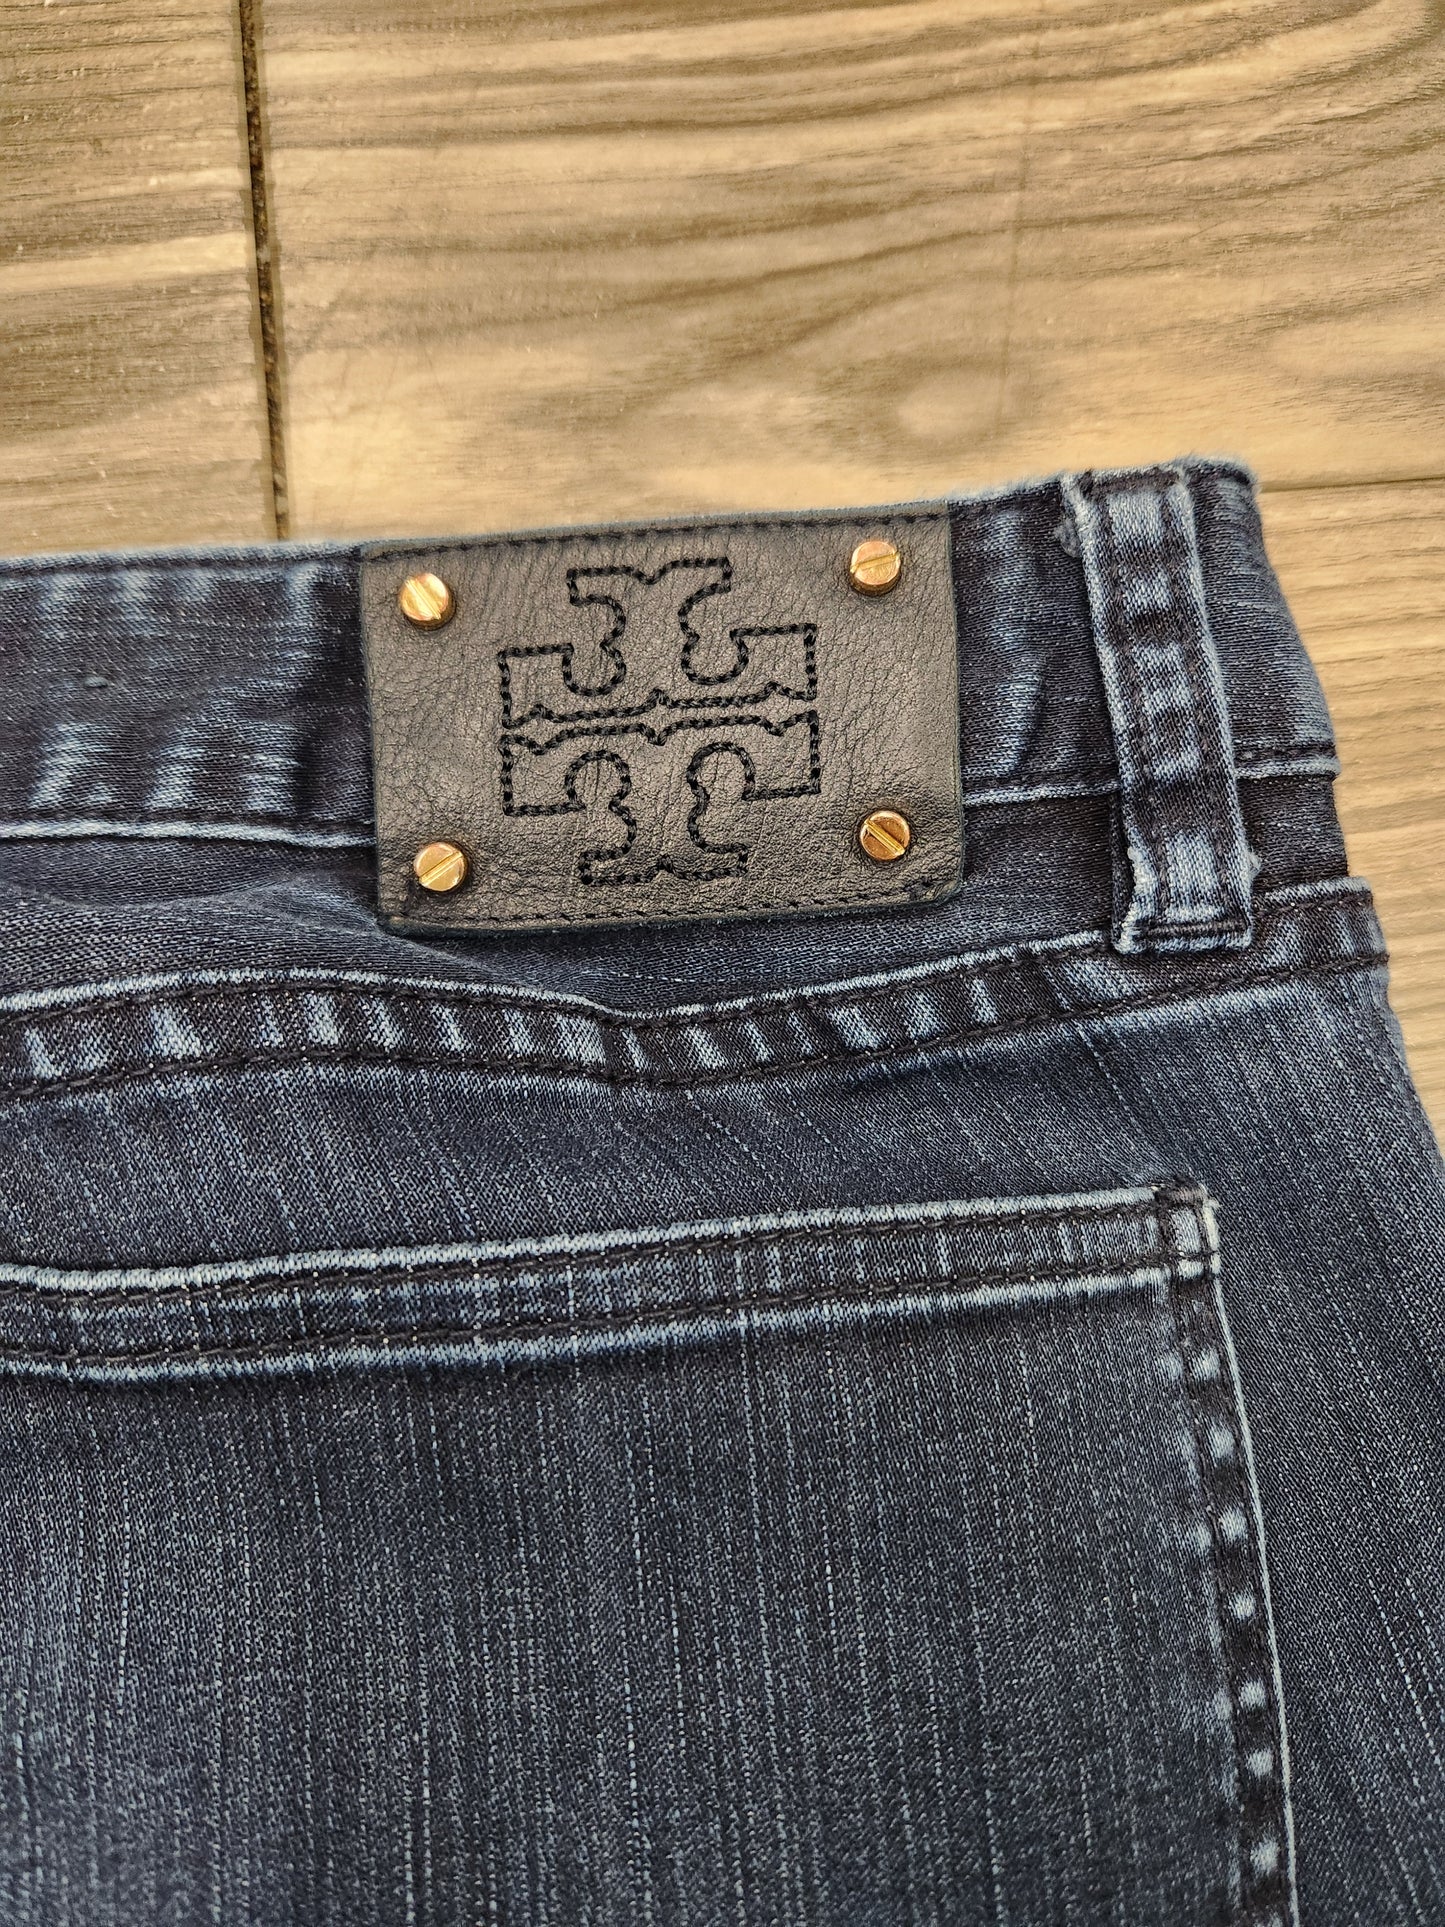 Jeans Straight By Tory Burch  Size: 12